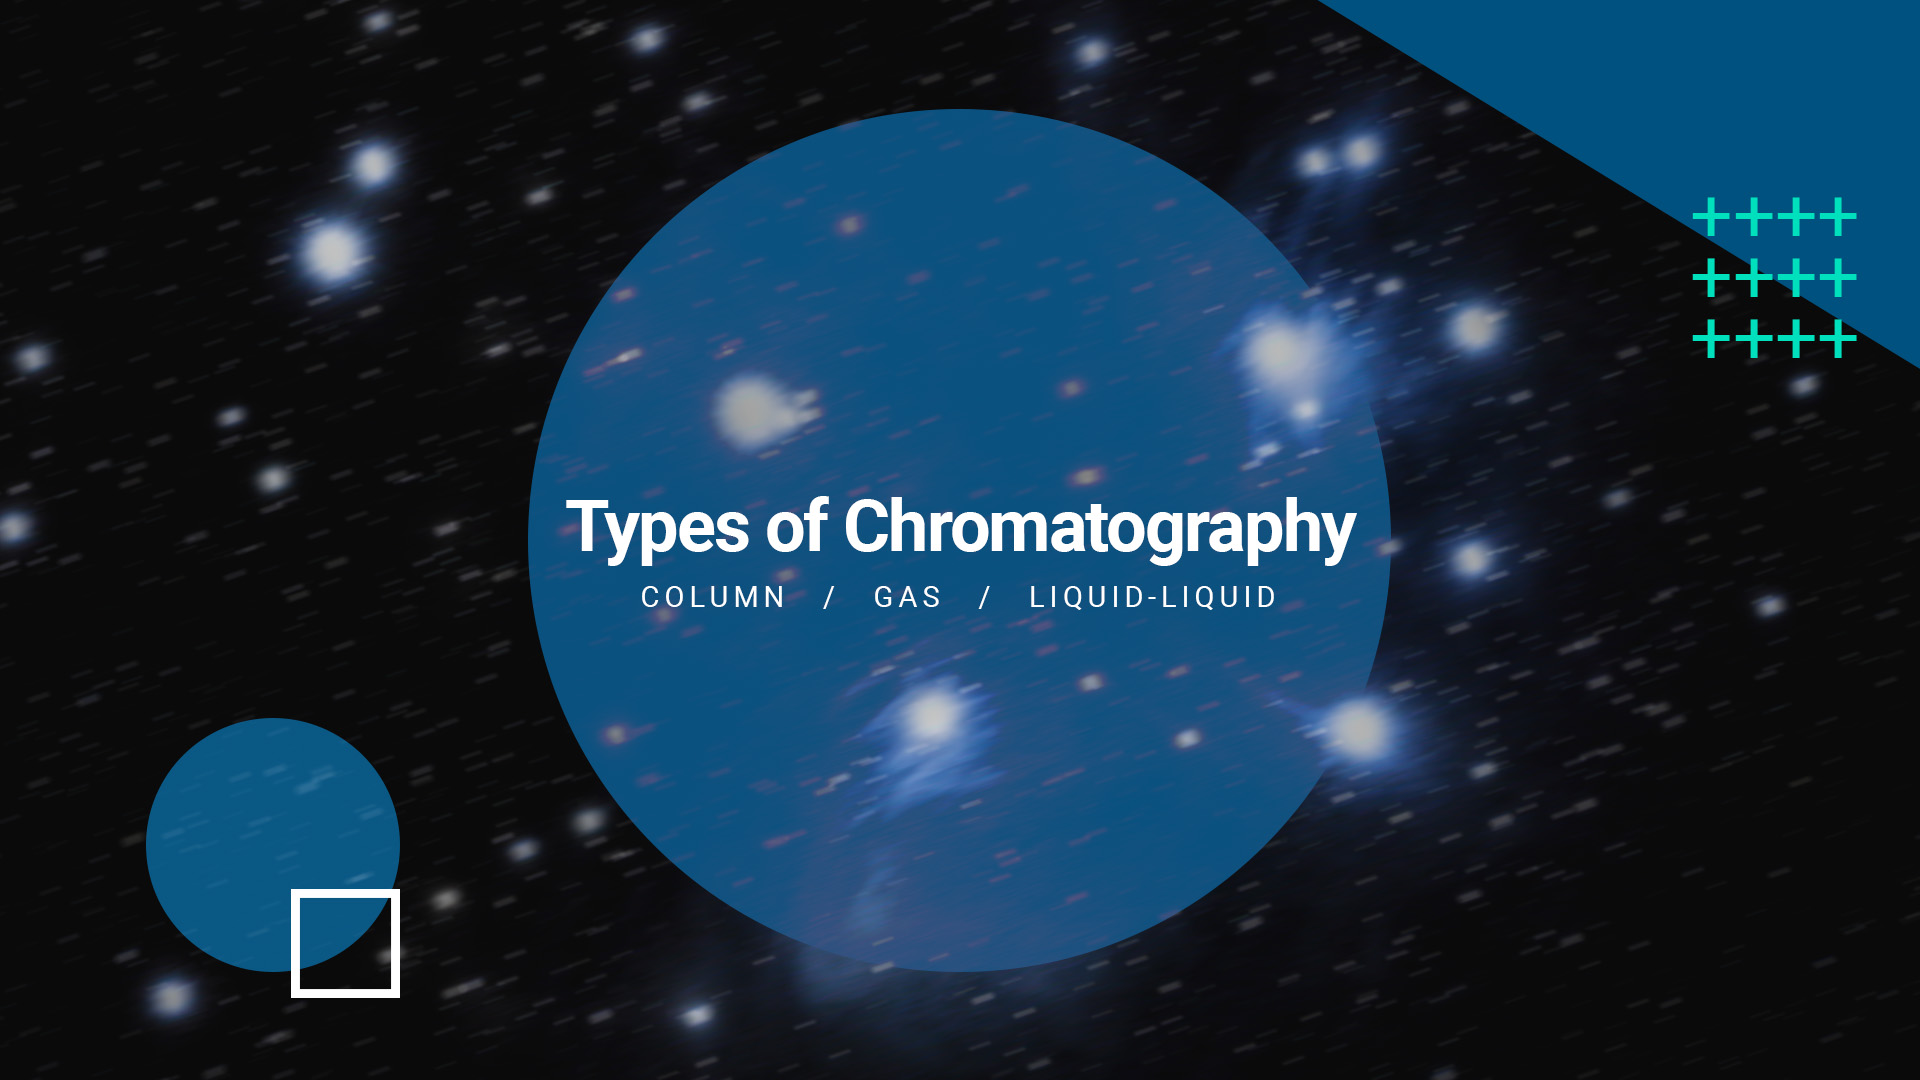 Header to part 1 of types of chromatography